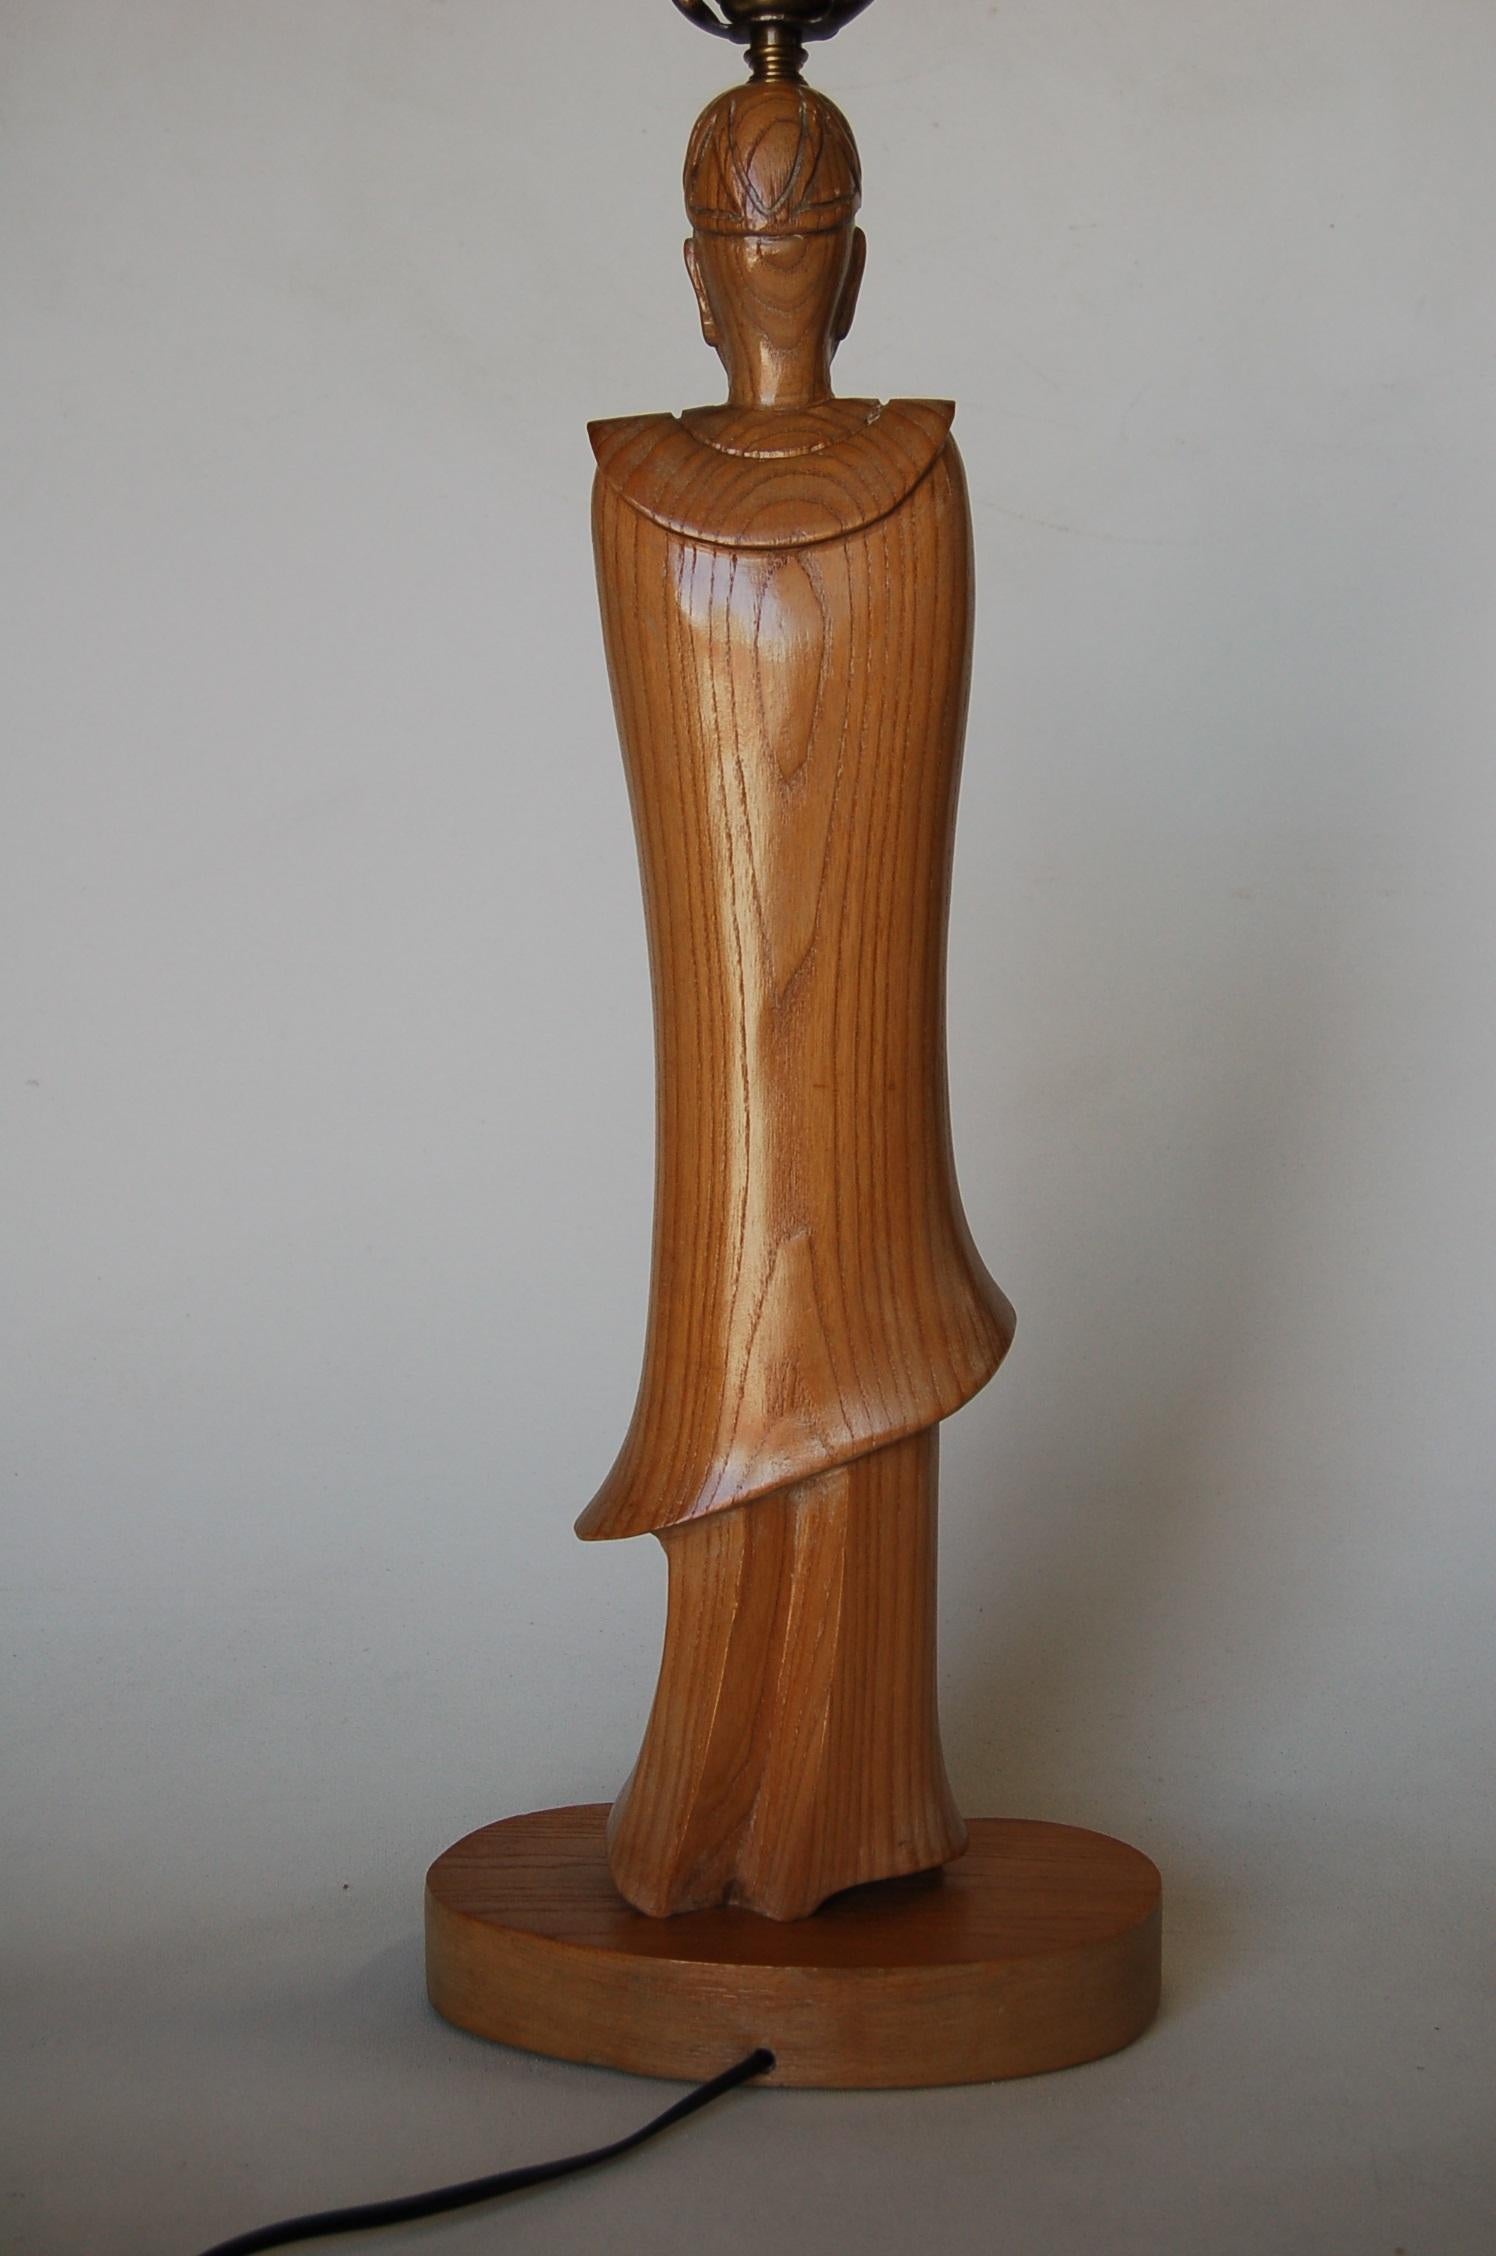 Midcentury Carved Oak Chinese Monk Wood Figure Lamp In Excellent Condition For Sale In Van Nuys, CA